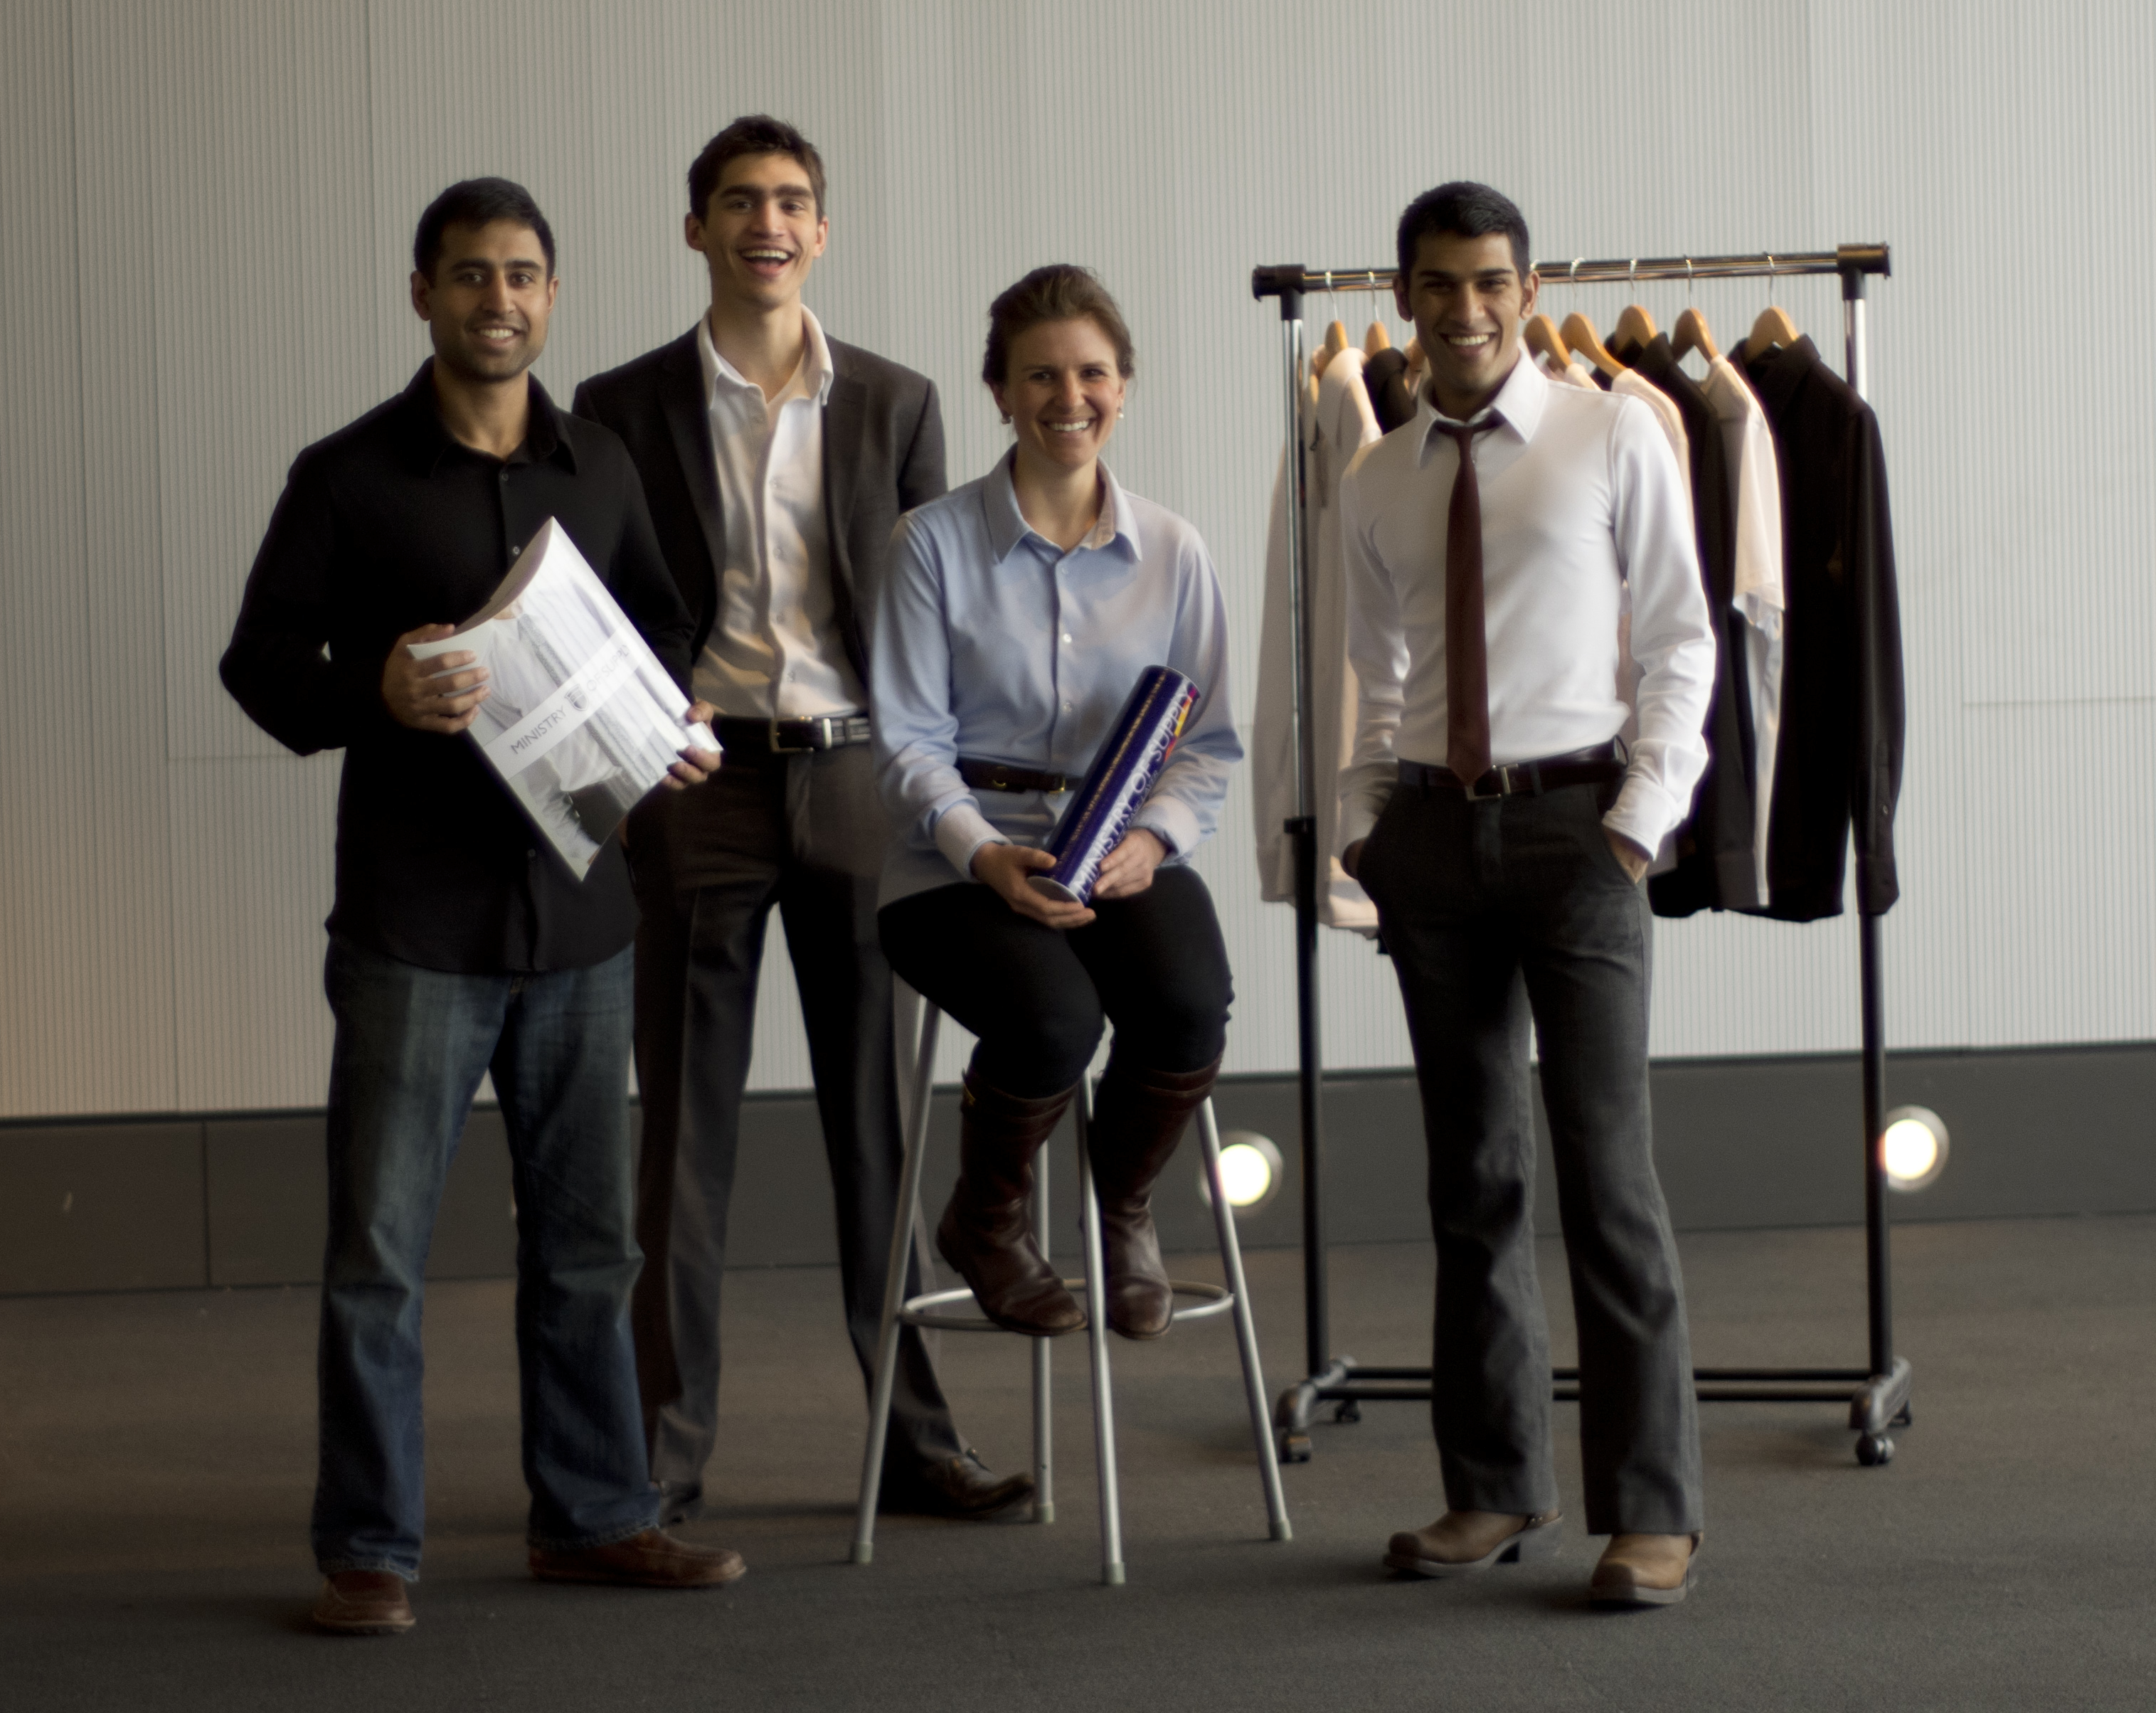 Inspired by James Bond and Spacesuits, this MIT grad wants to revolutionize business attire